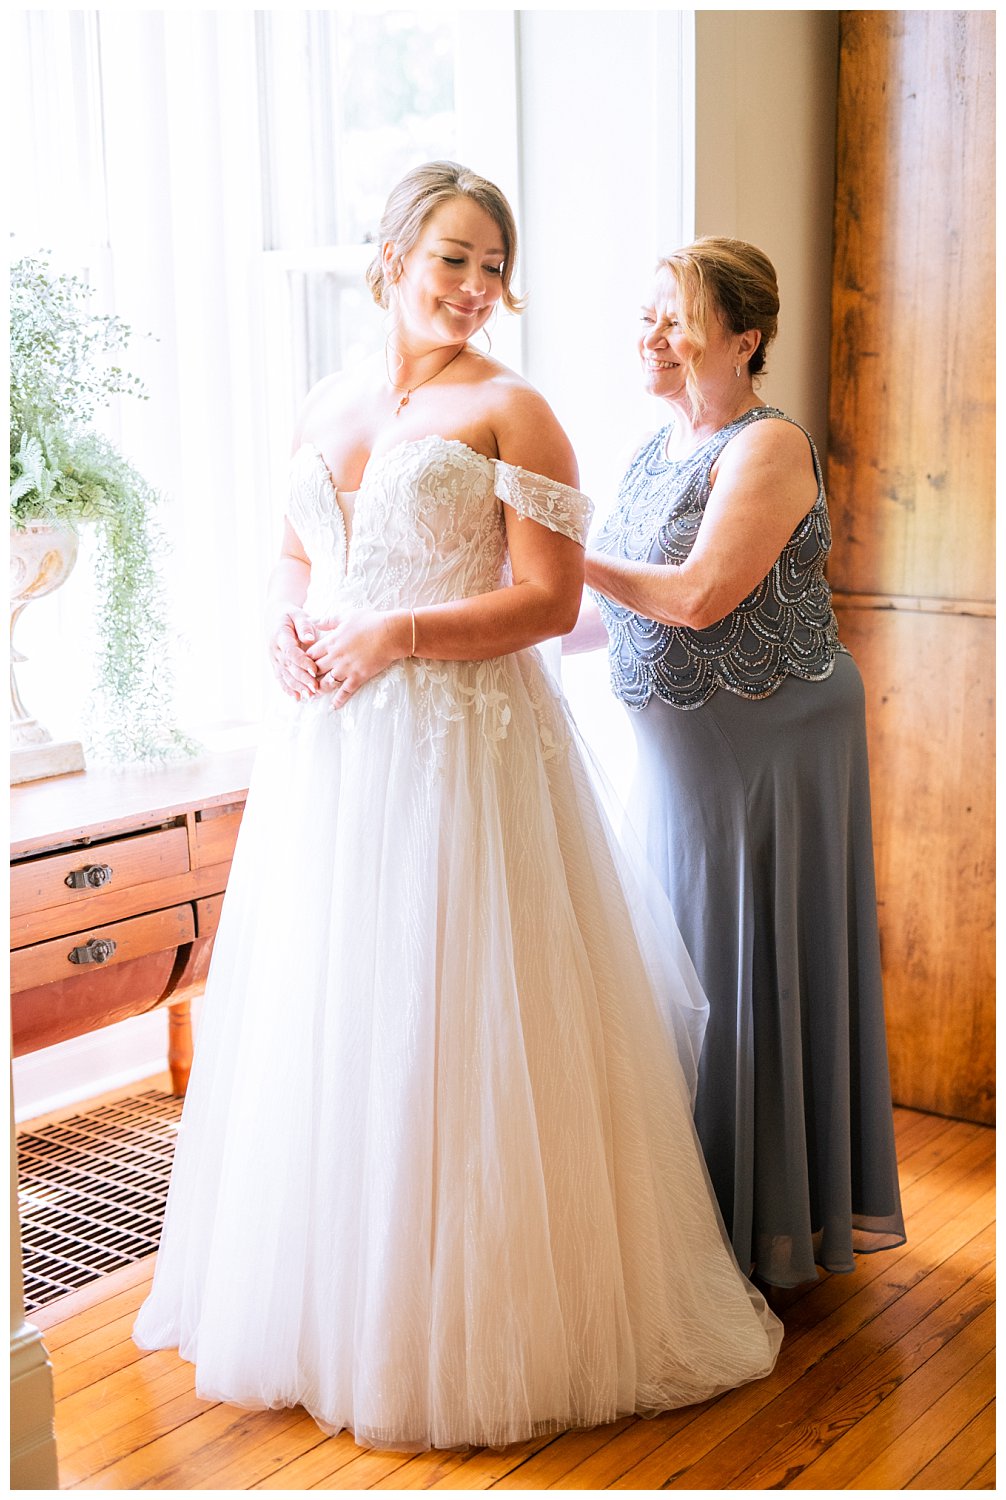 Mother of the bride helping her daughter button up her gown